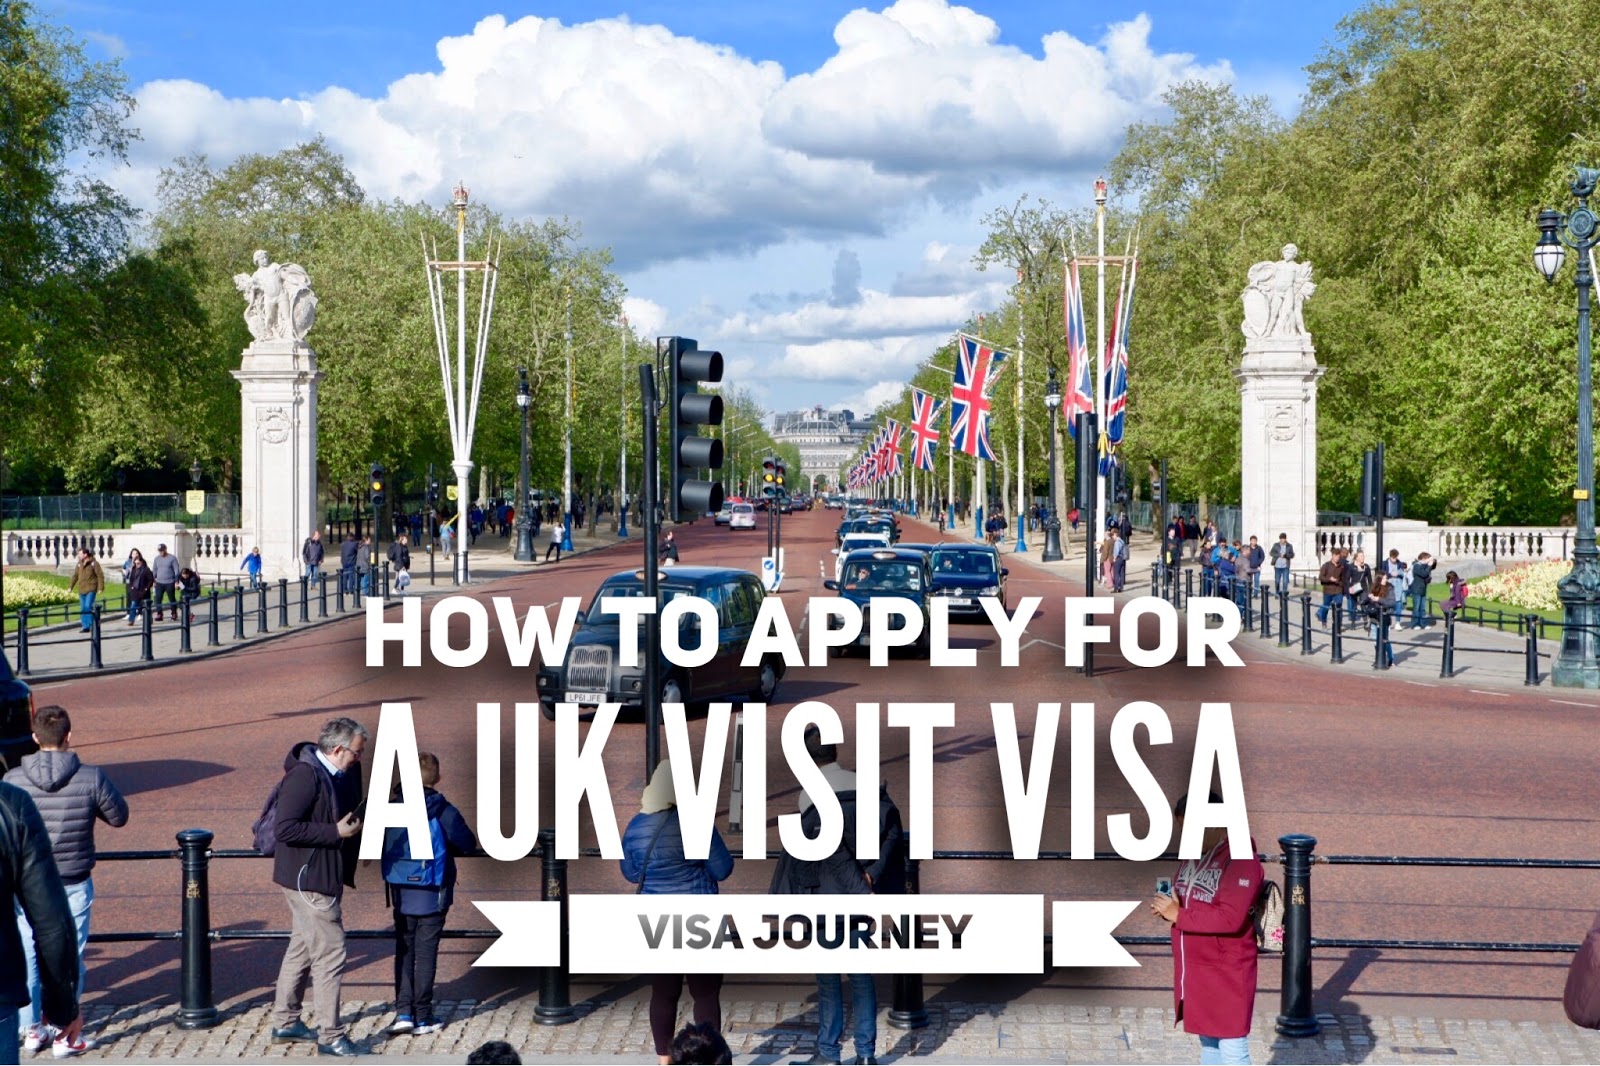 Visa Journey: Applying for a UK Visit Visa in the Philippines (Part 1)